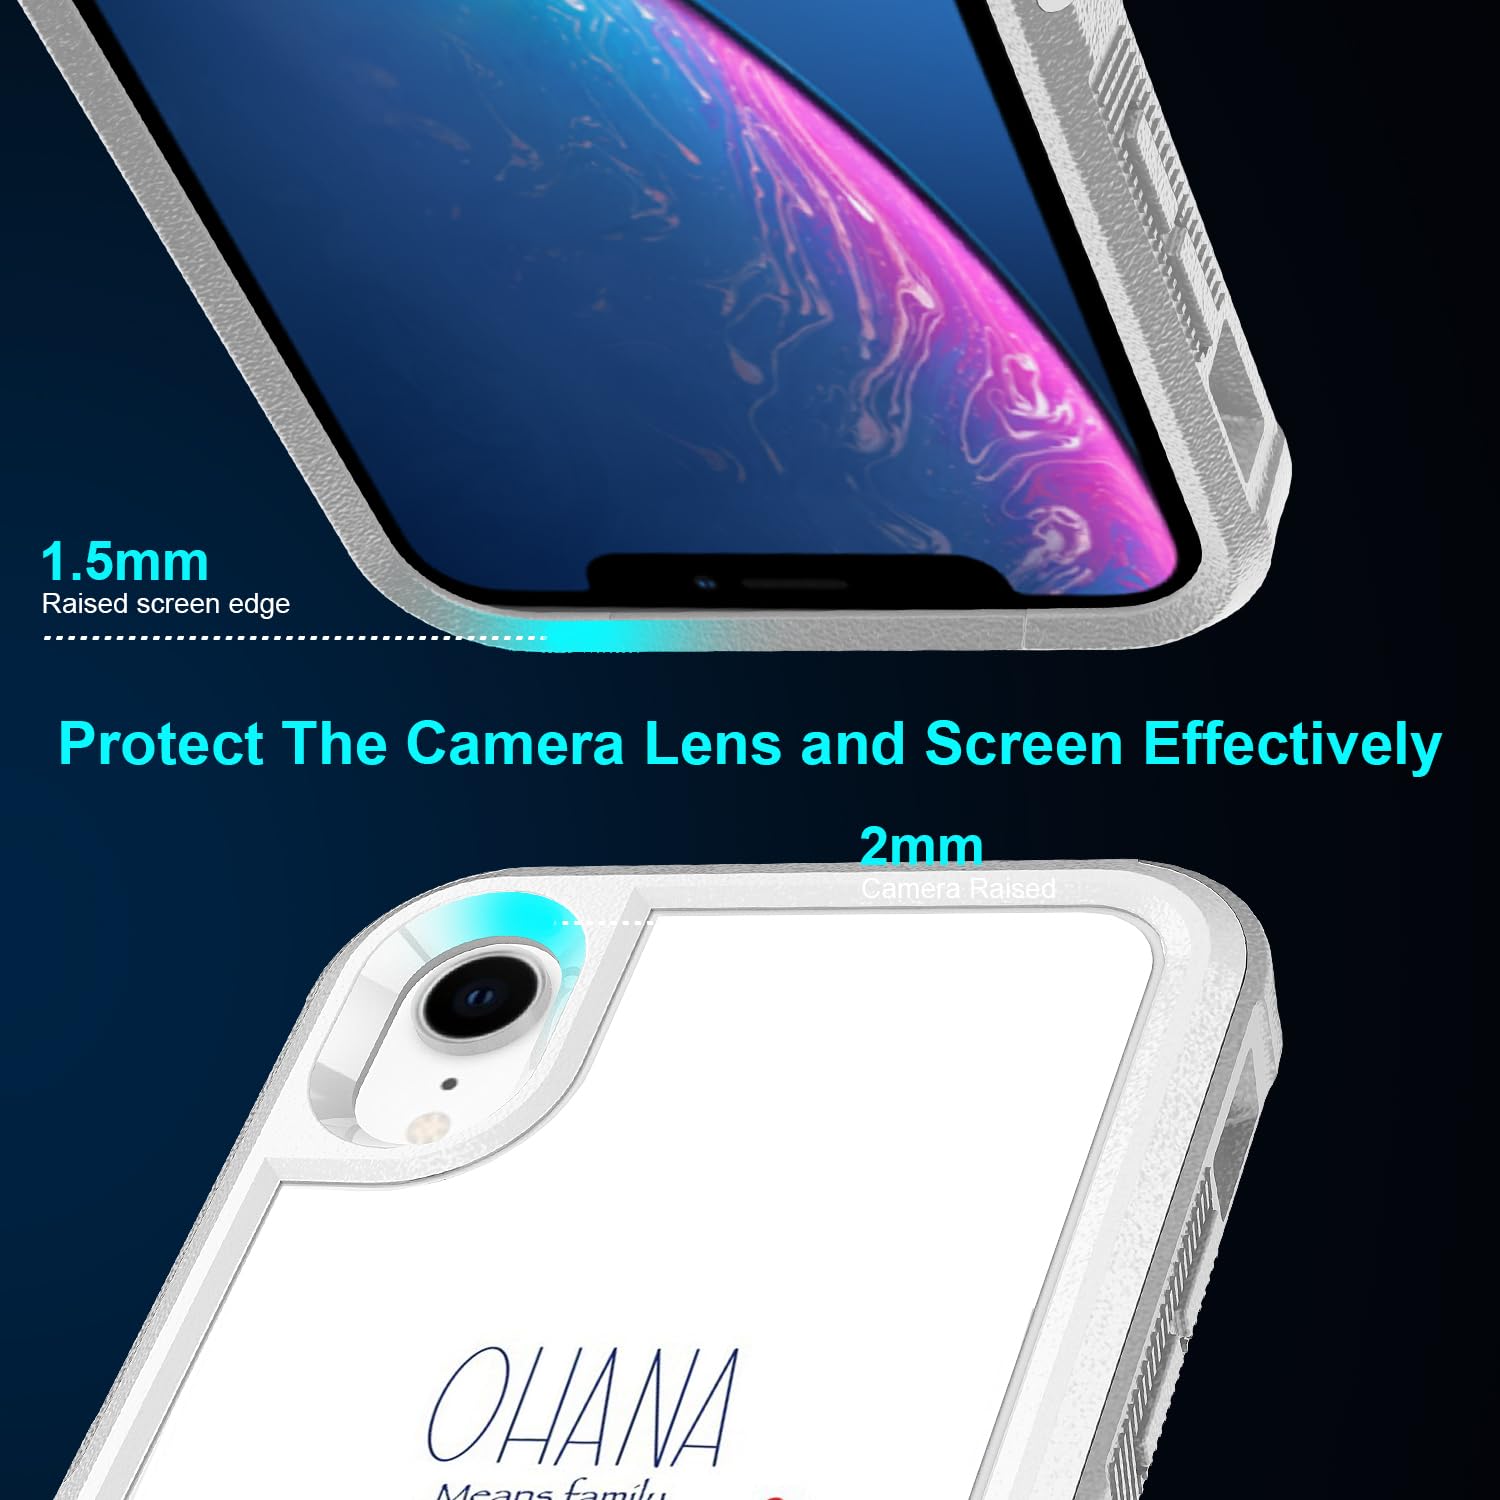 Candykisscase Case for iPhone Xs, Stitch Ohana Means Family Pattern Shock-Absorption Hard PC and Inner Silicone Hybrid Dual Layer Armor Defender Case Protective Cover for Apple iPhone X and iPhone Xs